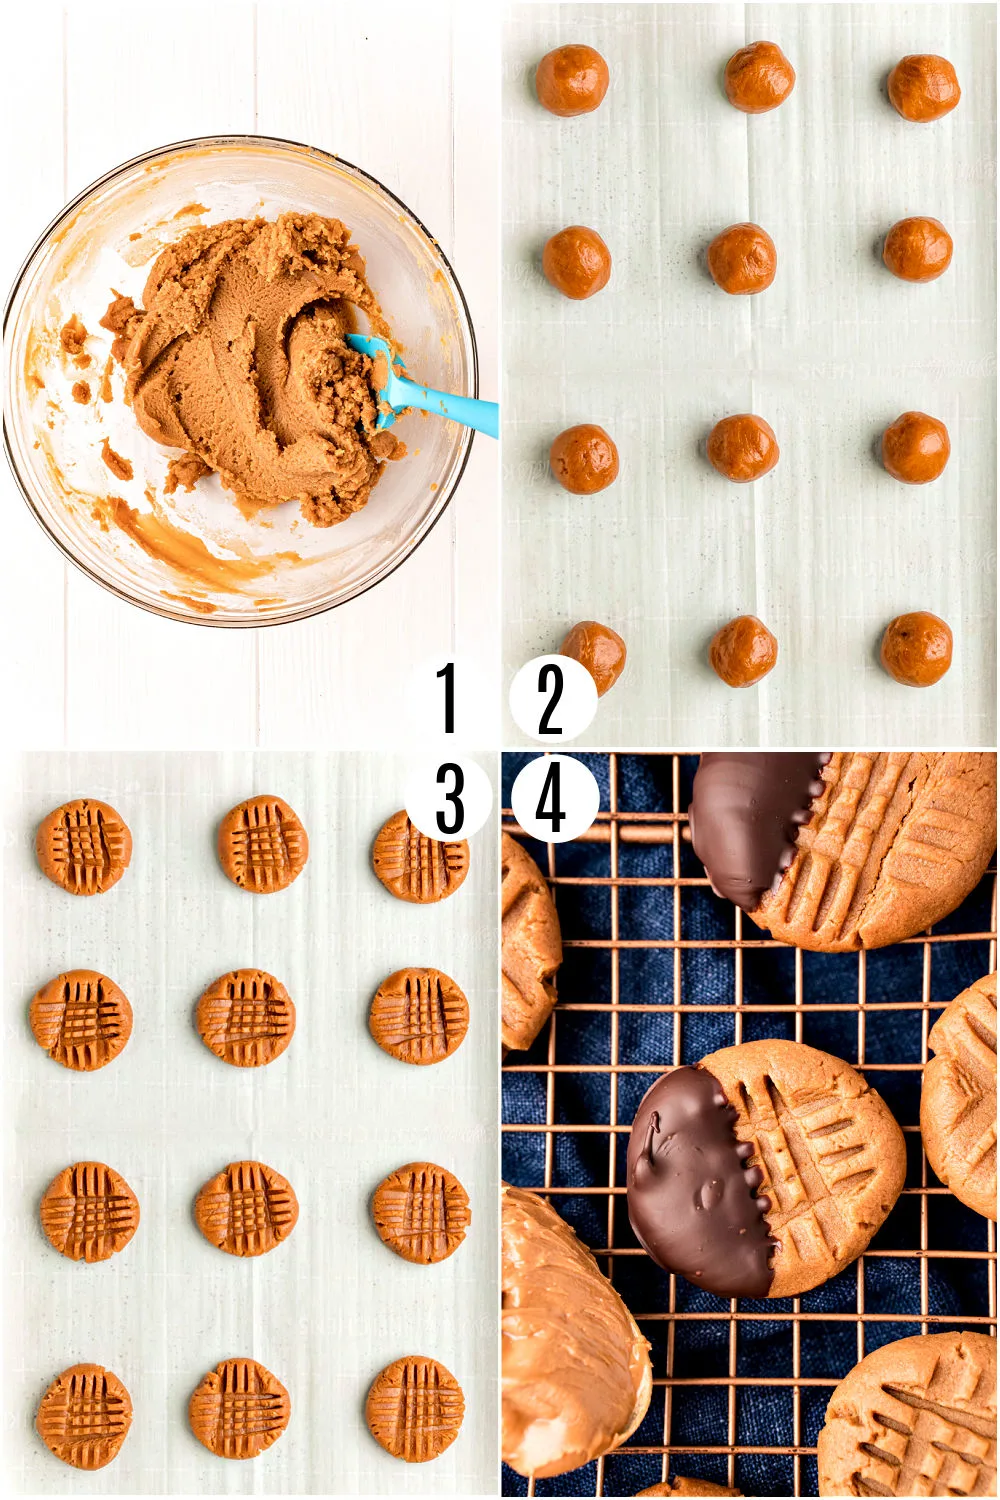 Step by step photos showing how to make keto peanut butter cookies.